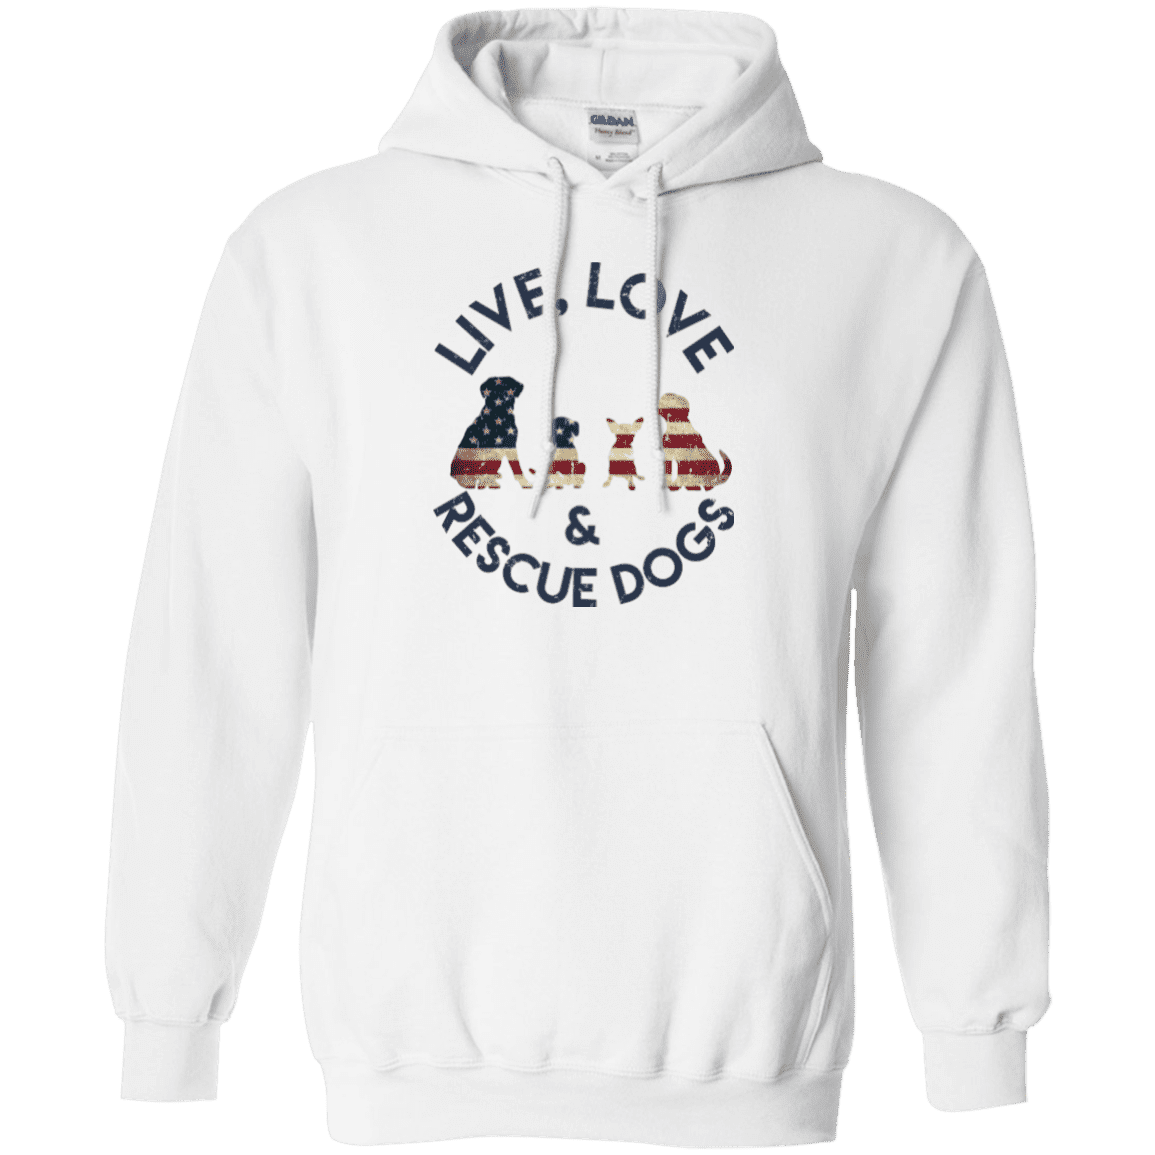 Live Love and Rescue Dogs - Hoodie.